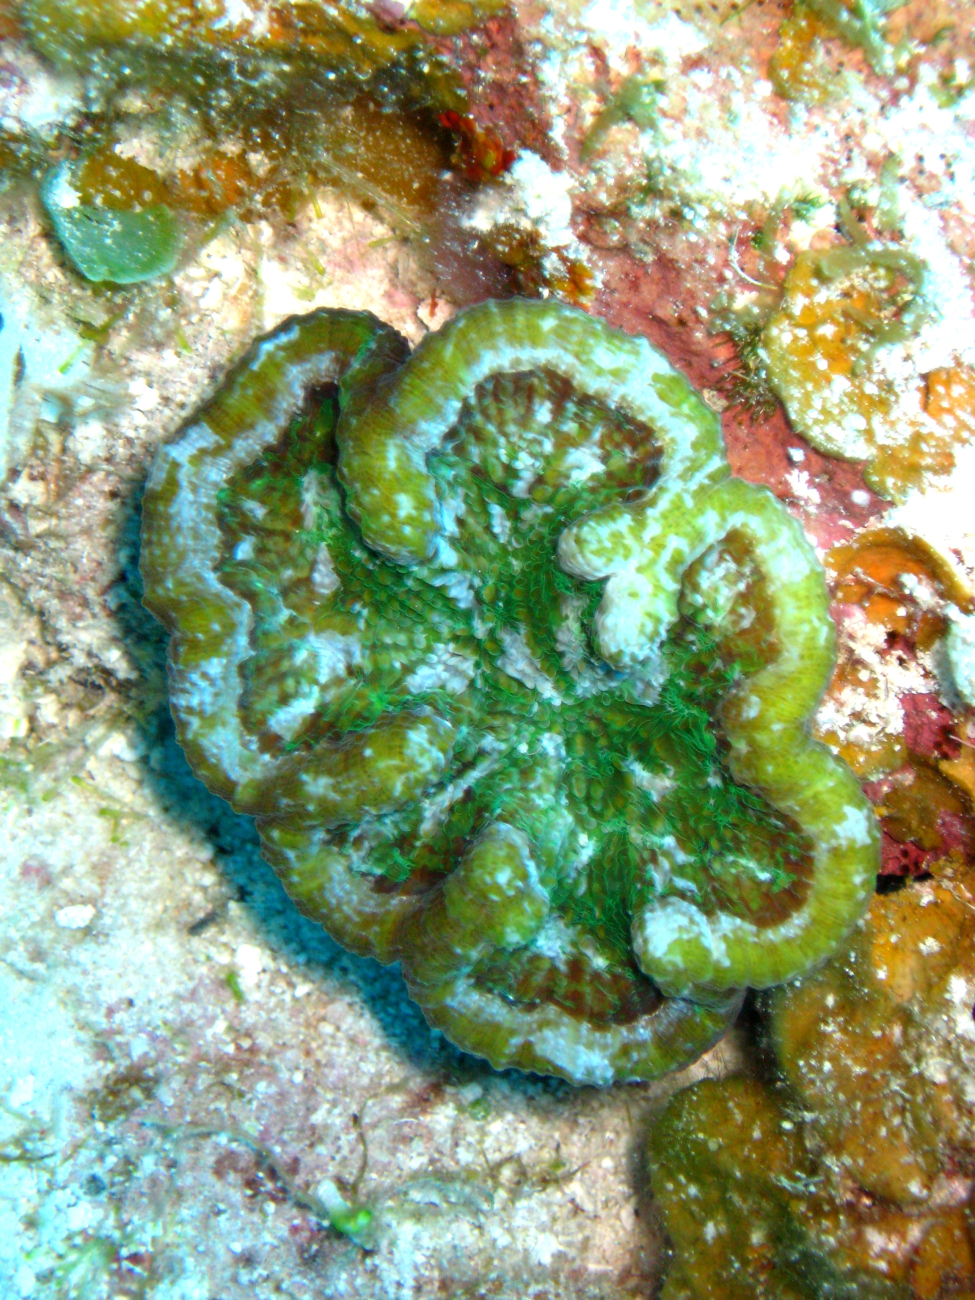 Green coral? green anemone?